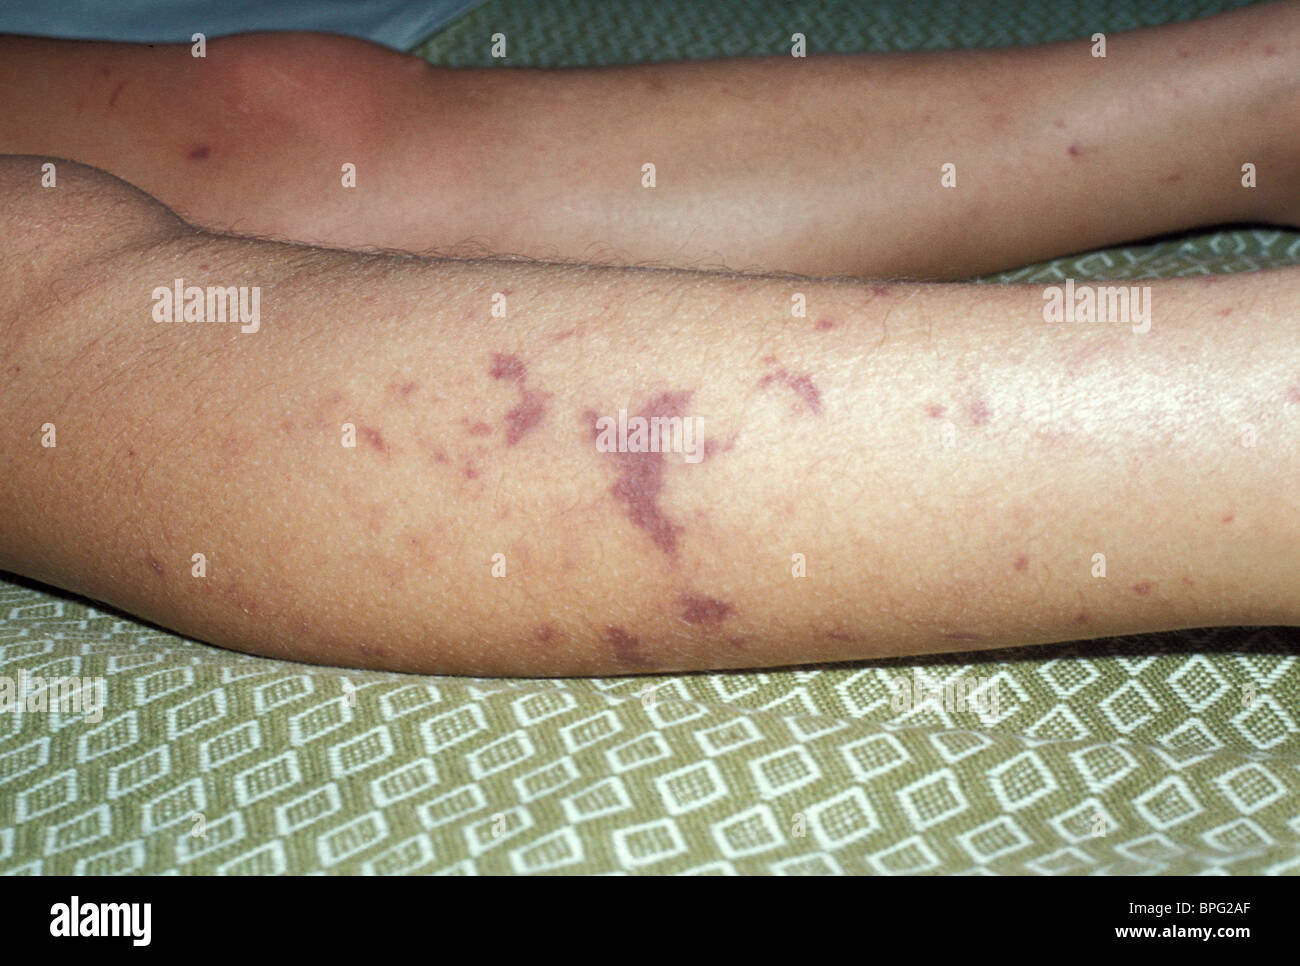 Purpuric rash on lower legs in meningococcal septicaemia in young girl who made full recovery. Stock Photo